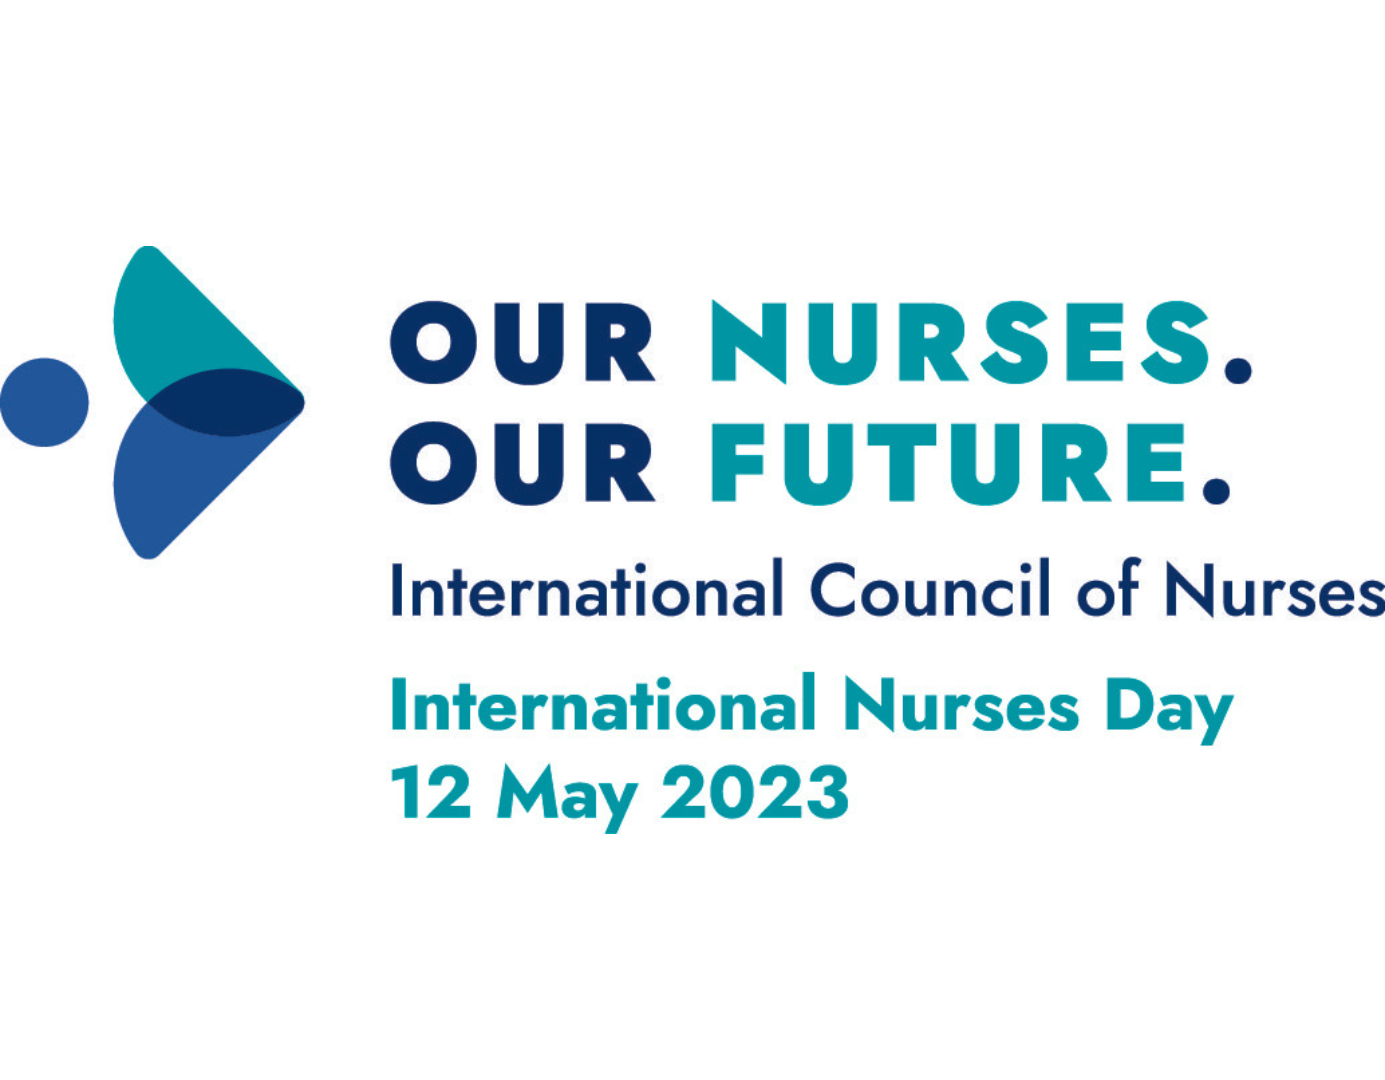 Symbol for International Nurses Day 2023. With text Our Nurses. Our Future. International Council of Nurses. International Nurses Day. 12 May 2023